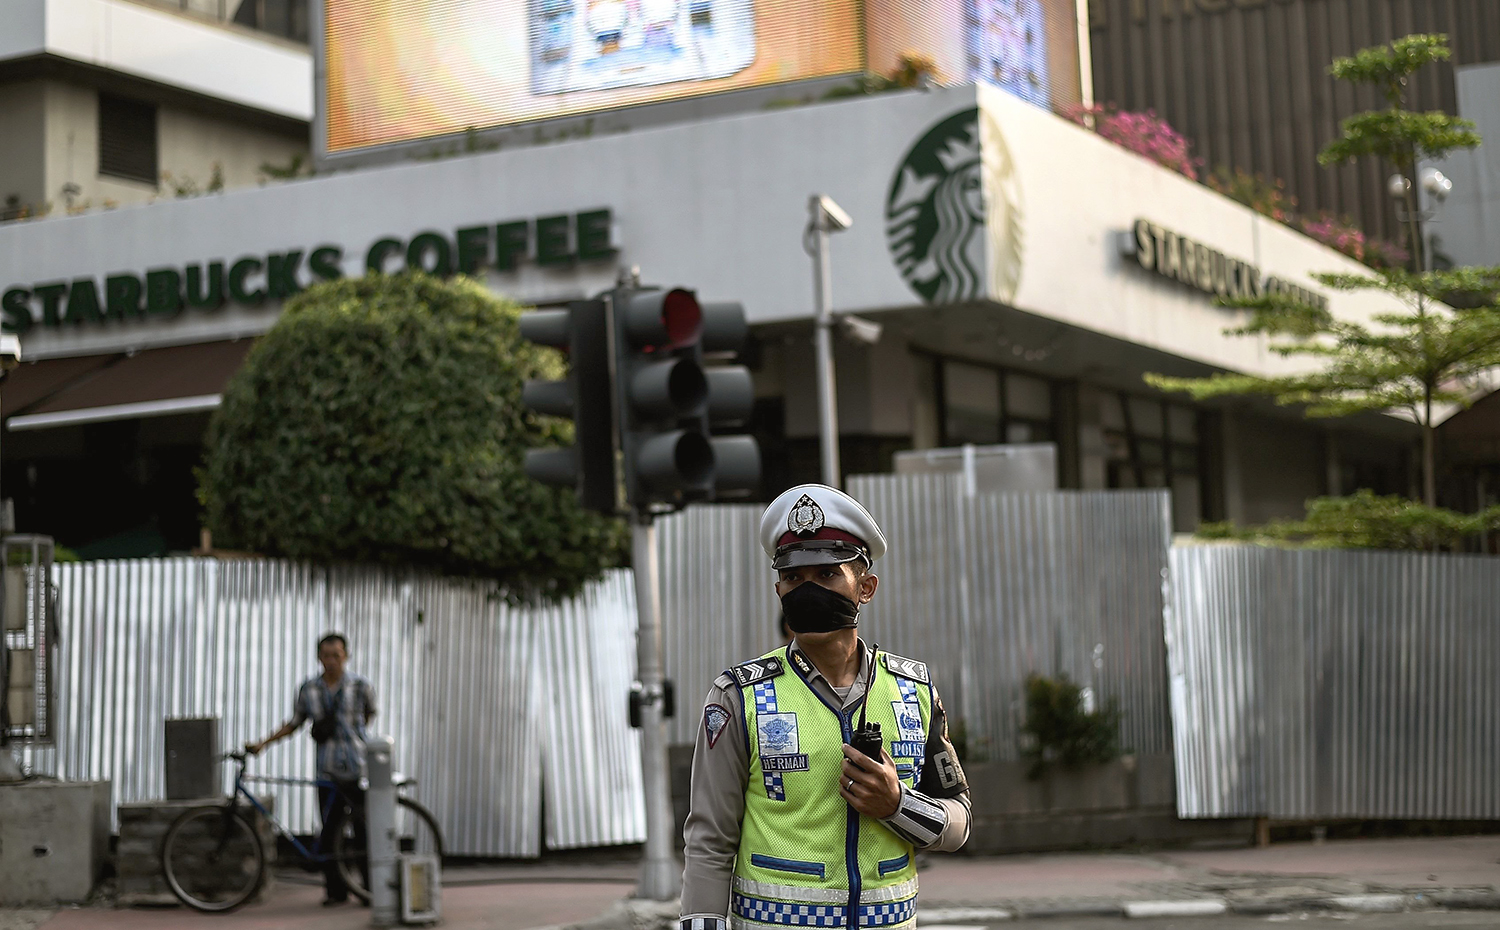 An Indonesian policeman stands guard in front of the damaged Starbucks building in Jakarta on January 15, 2016, a day after a series of explosions hit the Indonesian capital. Islamic State suicide bombers and gunmen struck the capital of Muslim-majority Indonesia on January 14, executing a Westerner and blowing up a Starbucks in an assault police said bore the hallmarks of the Paris attacks. AFP PHOTO / MANAN VATSYAYANA